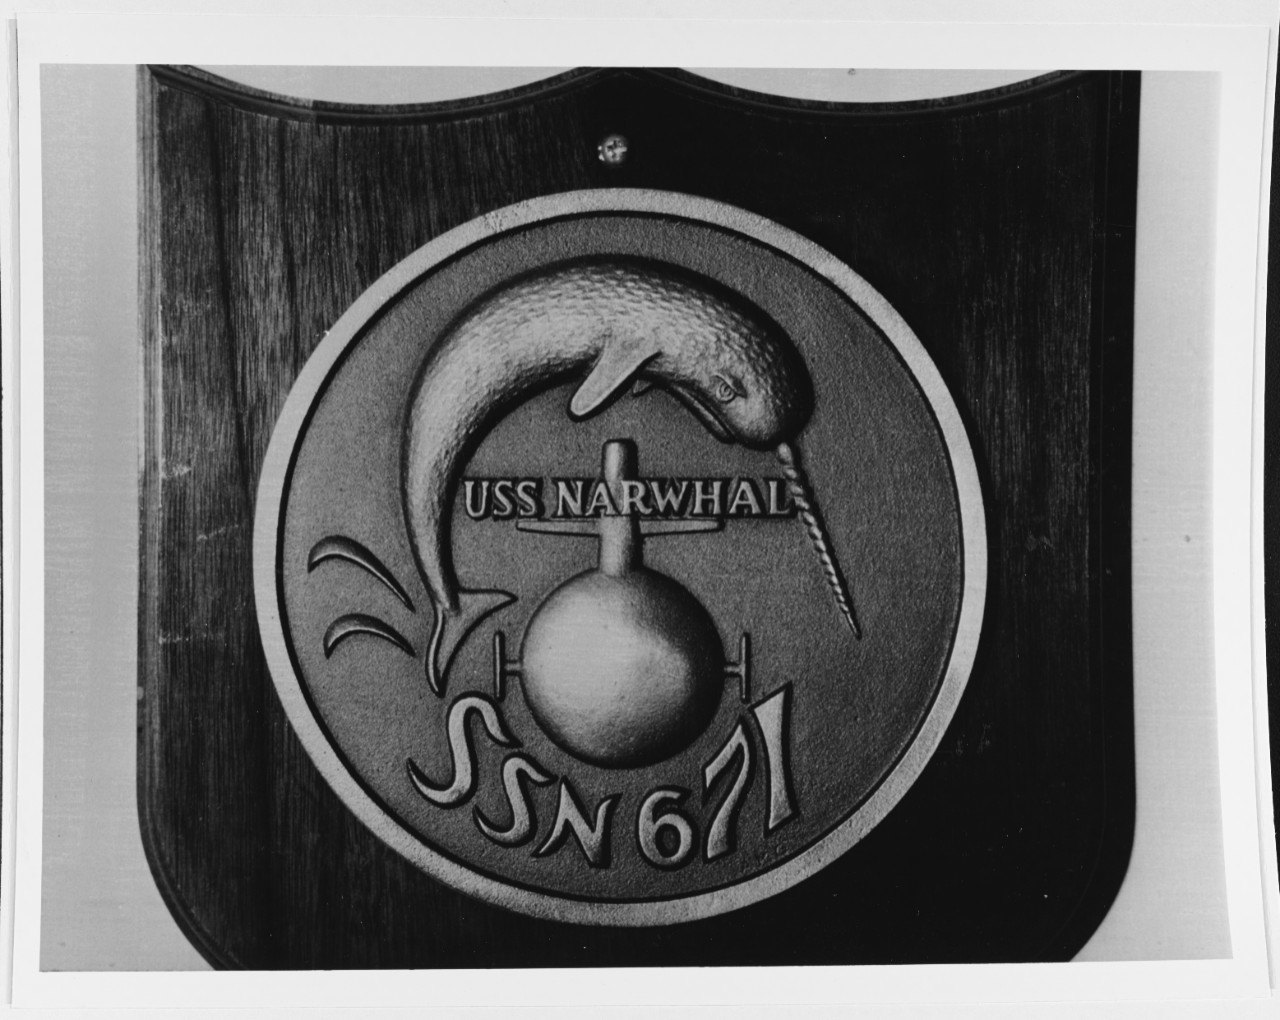 Insignia: USS NARWHAL (SSN-671)